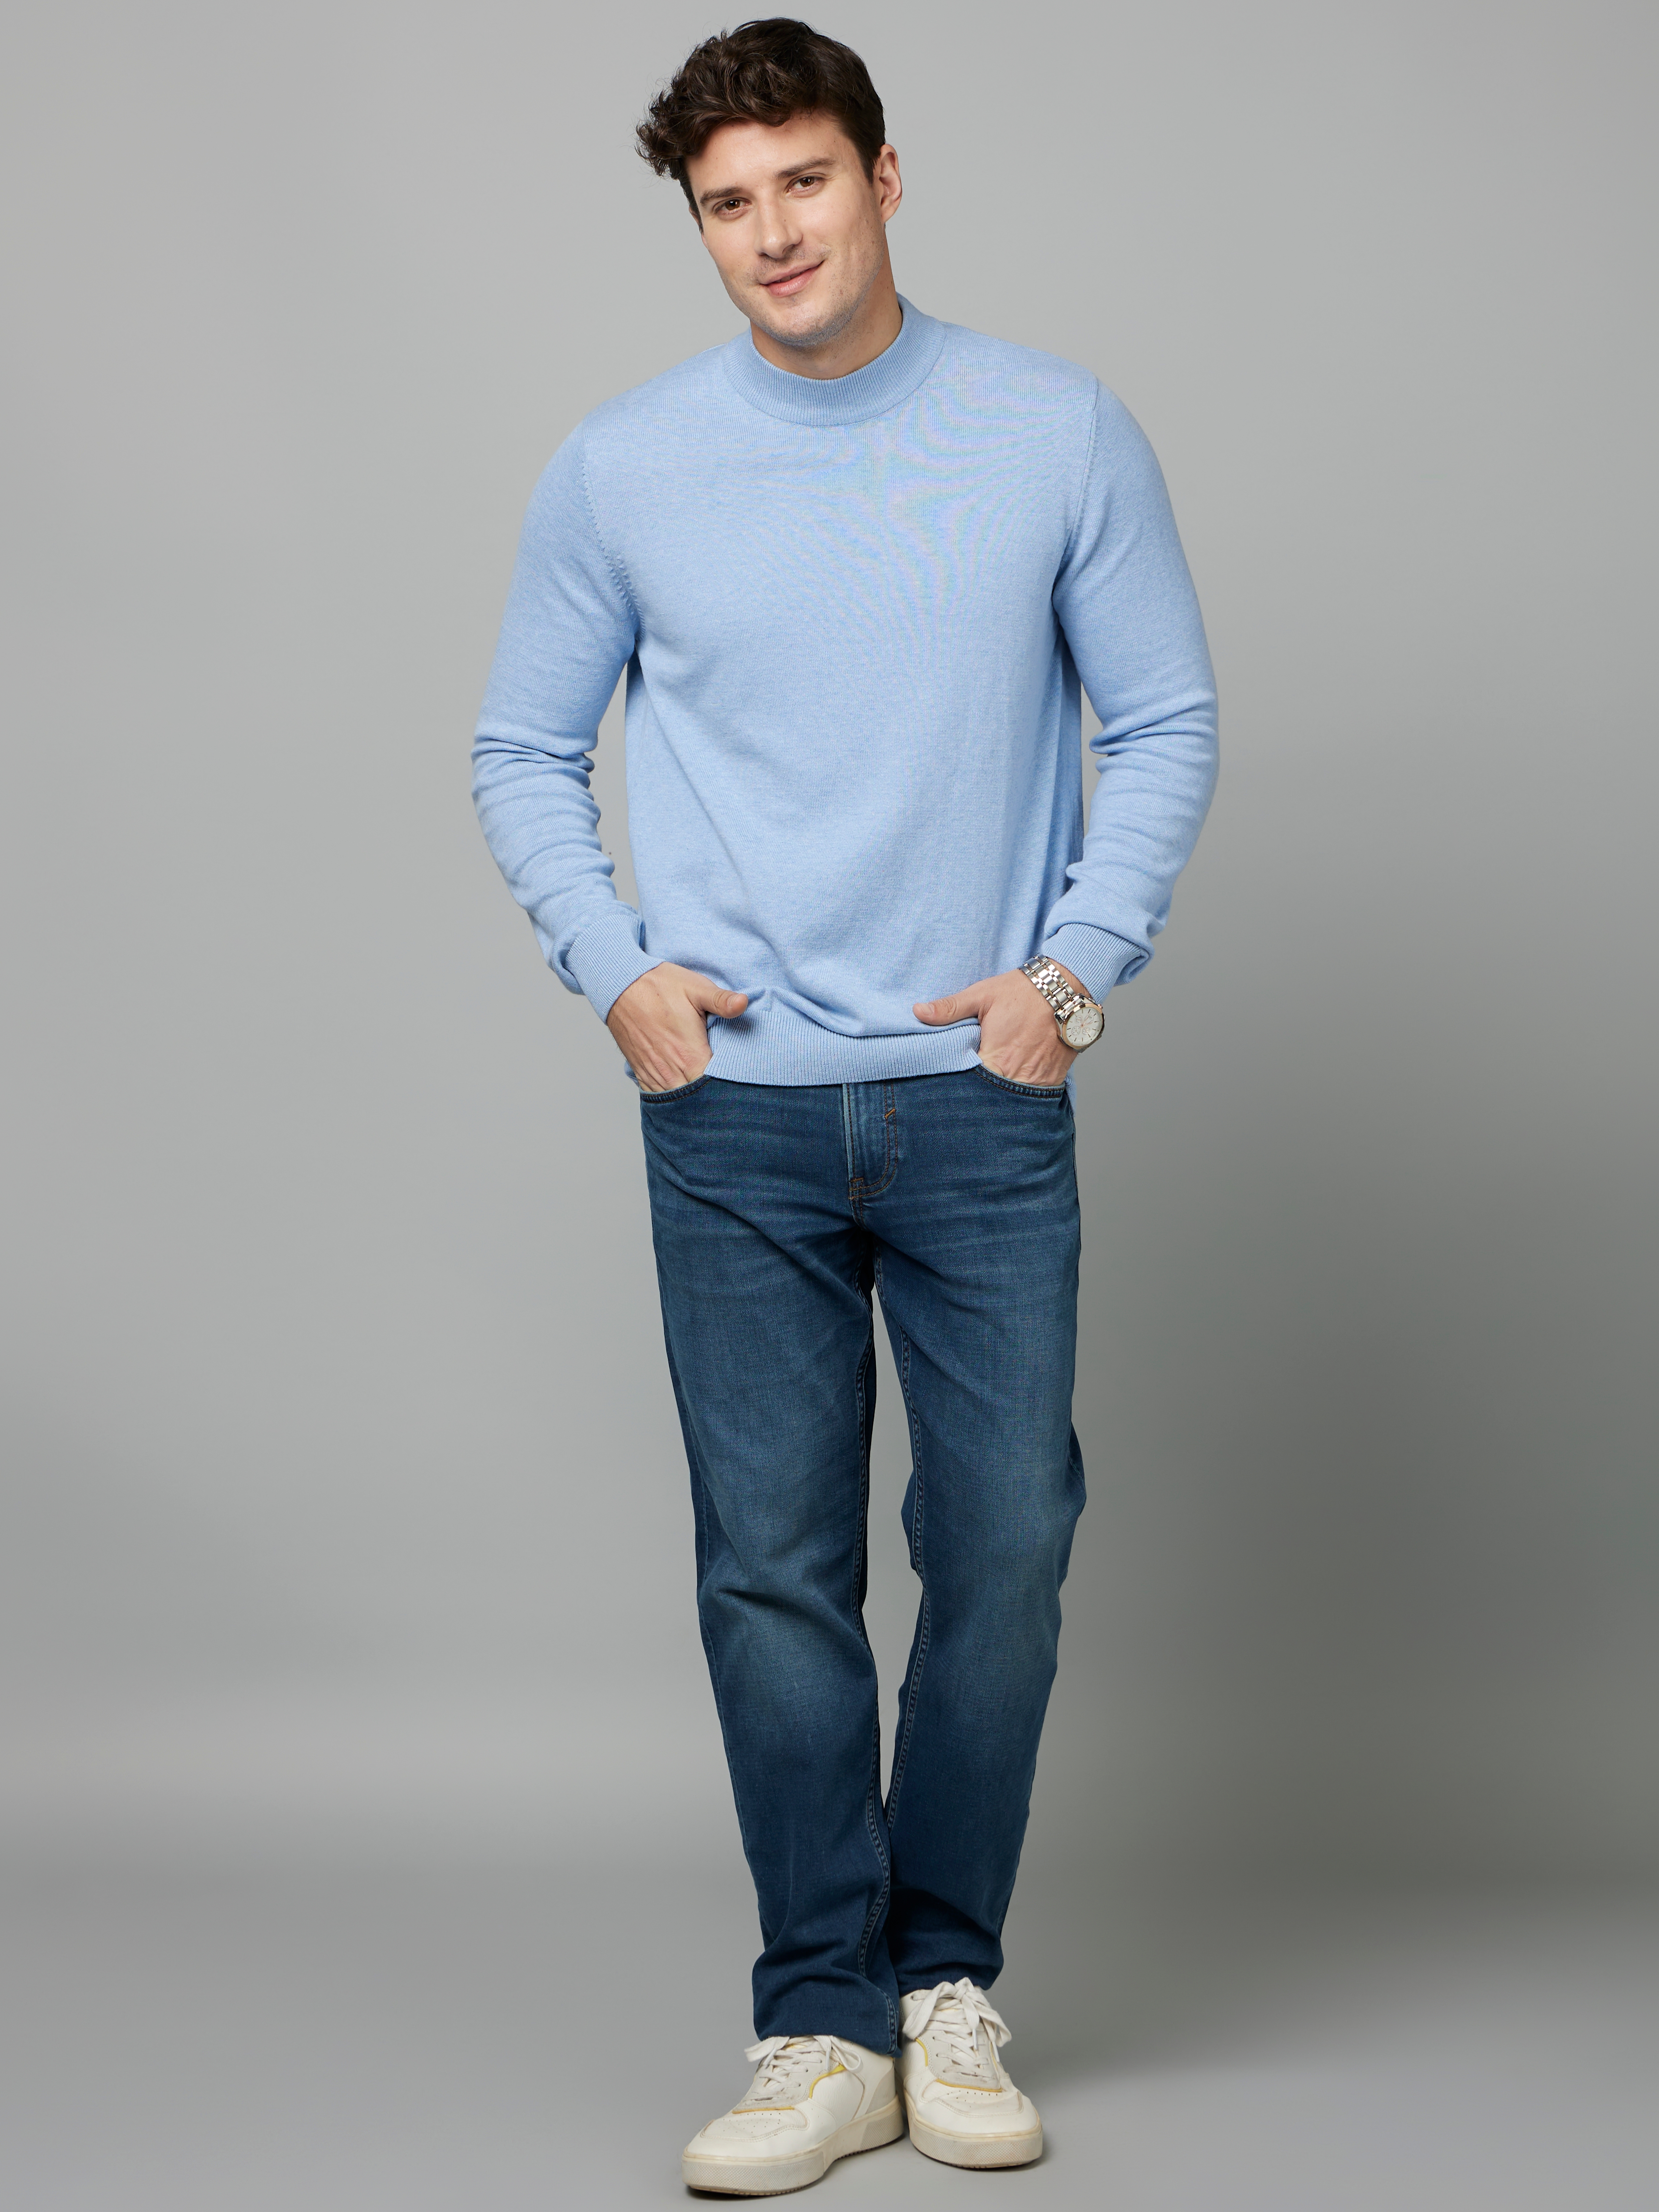 Men's Blue Solid Sweaters